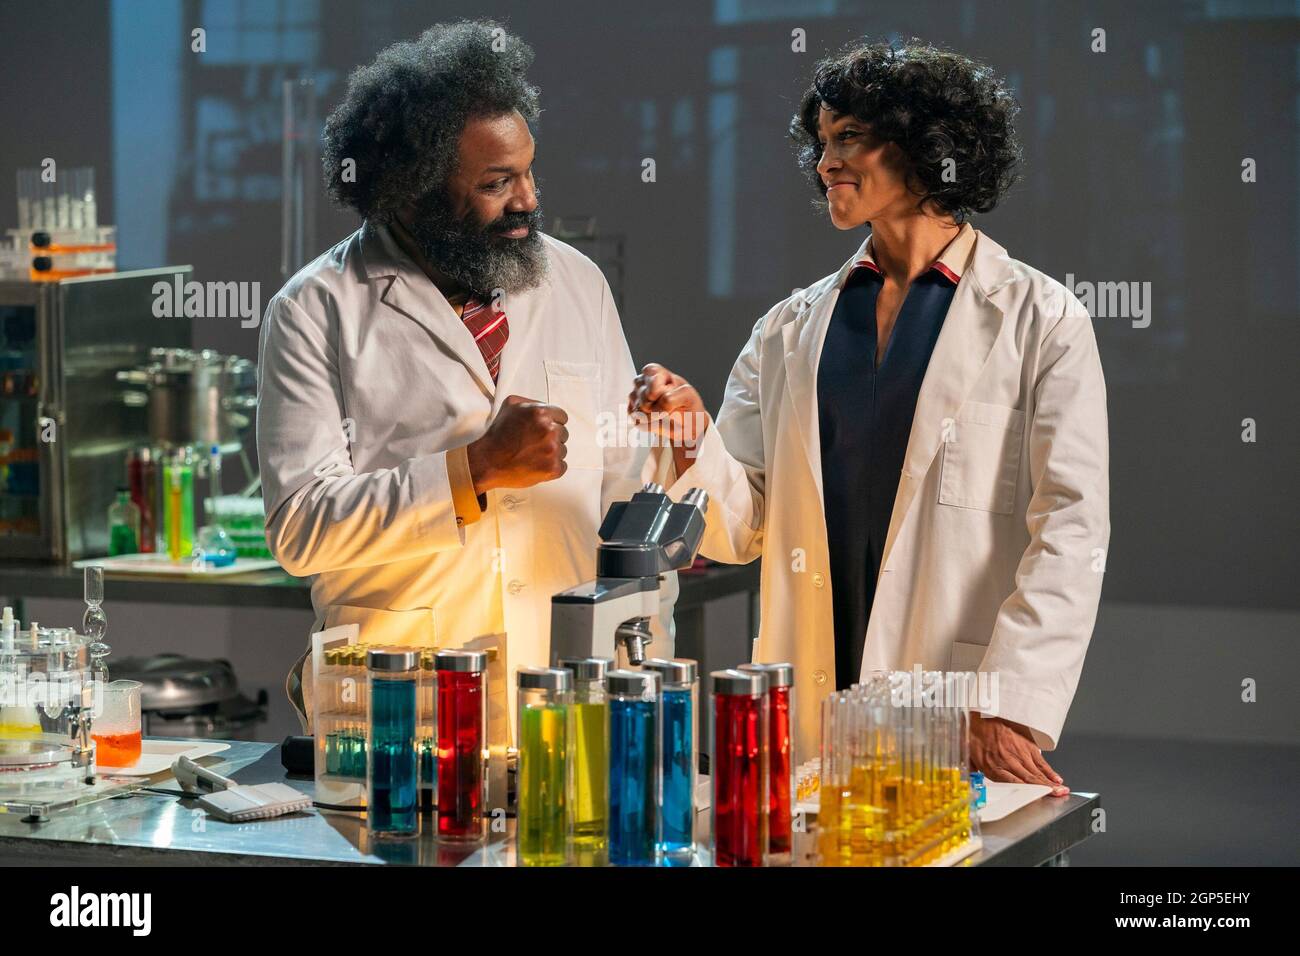 SHERMAN'S SHOWCASE: BLACK HISTORY MONTH SPECTACULAR, from left: Nikeva  Stapleton as Black Scientist #1, D.Rodney Carter as Black Scientist #2,  (aired June 19, 2020). photo: Michael Moriatis / ©IFC / Courtesy Everett  Collection Stock Photo - Alamy